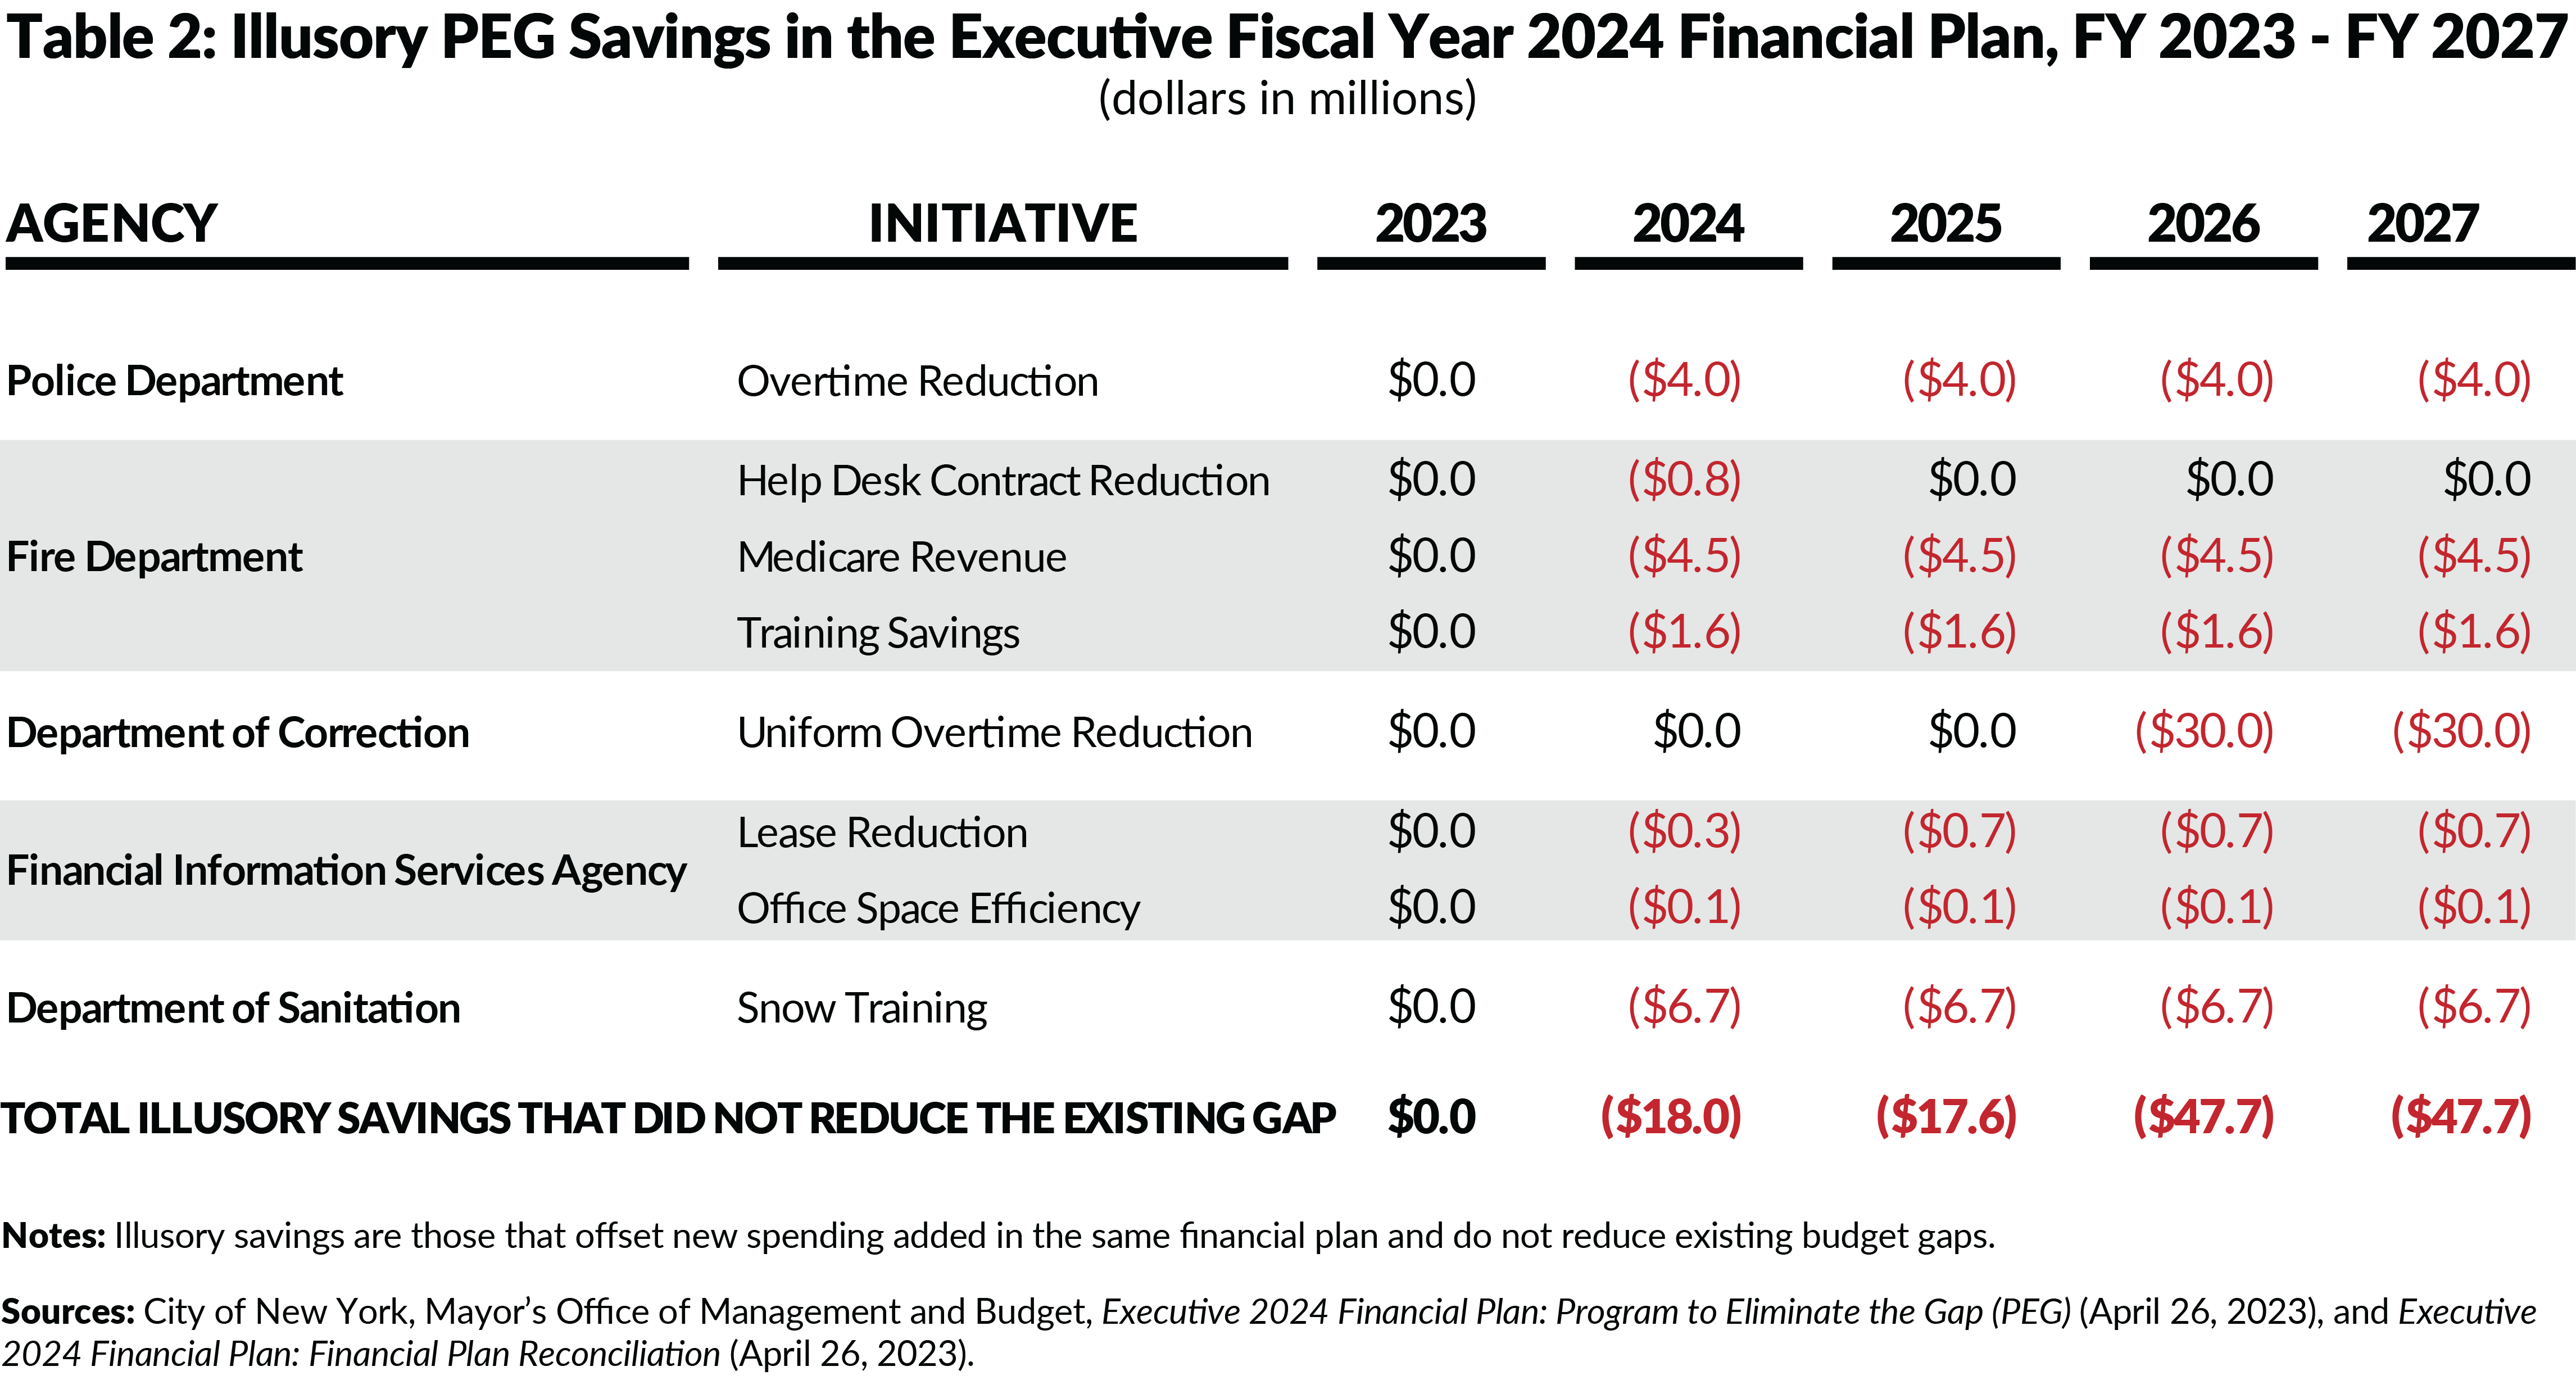 Table 2: Illusory PEG Savings in the Executive Fiscal Year 2024 Financial Plan